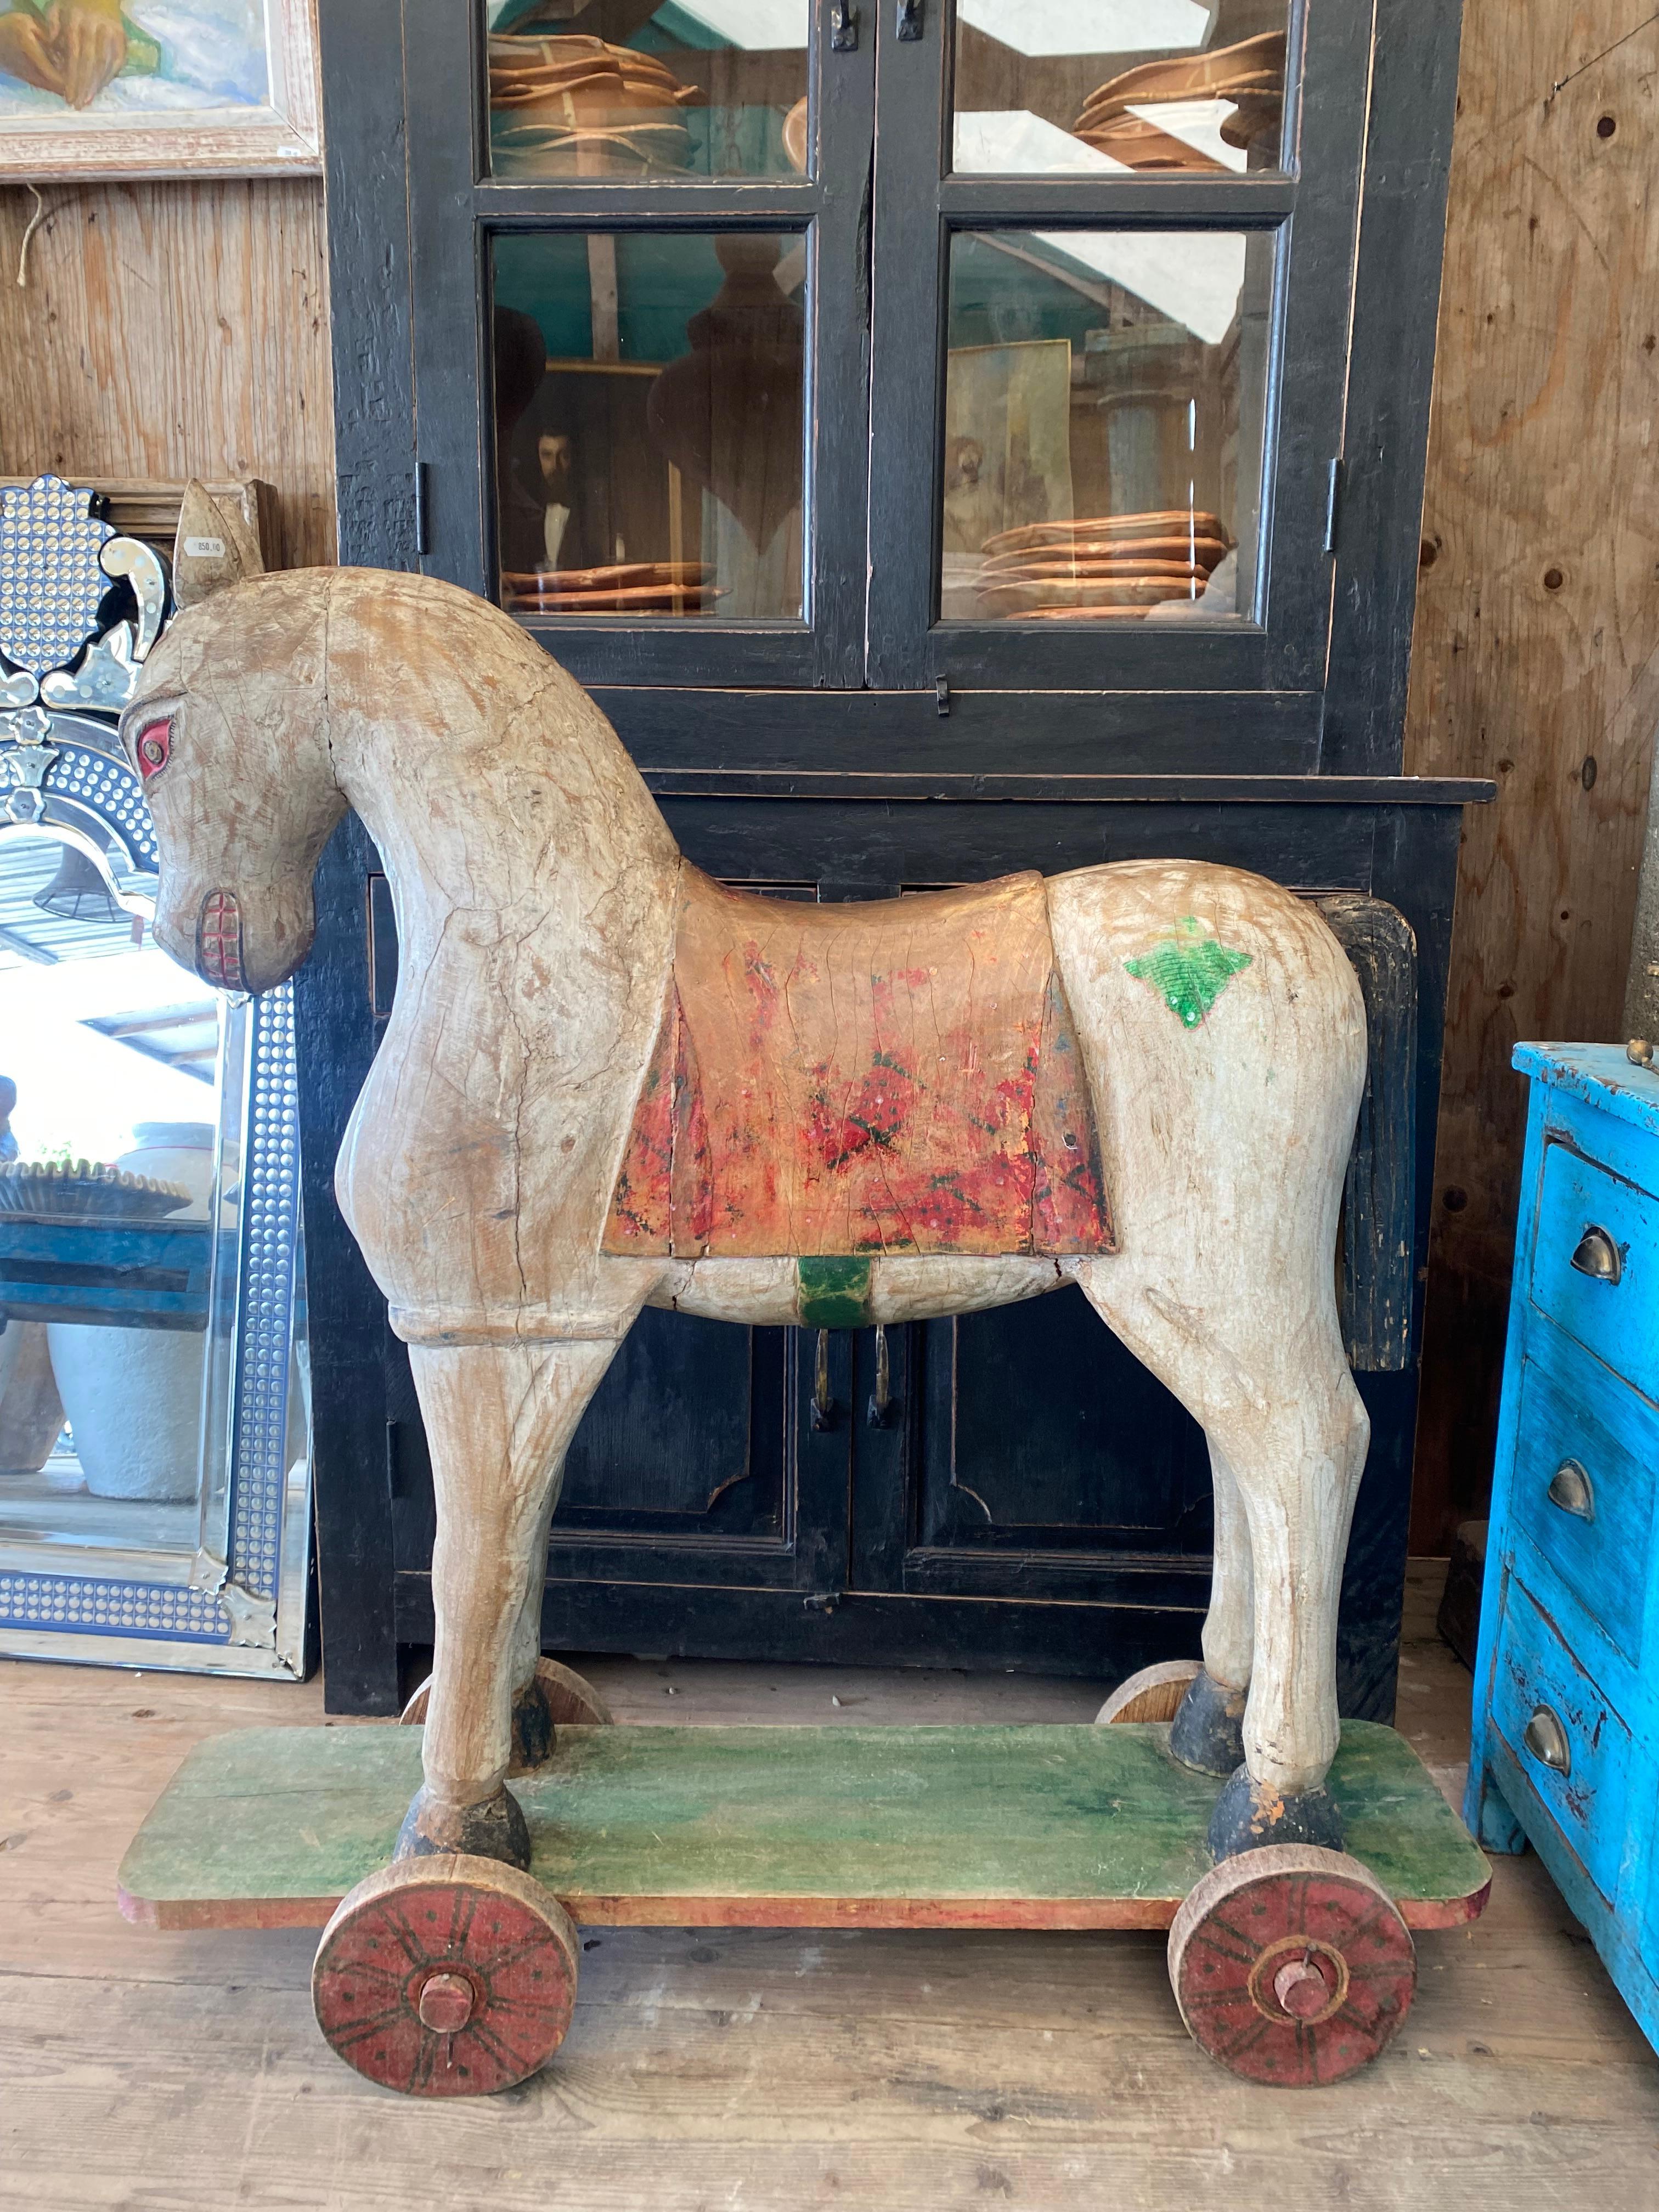 Beautiful polychromed wooden horse from Rajasthan.
Vintage patina
Good condition 